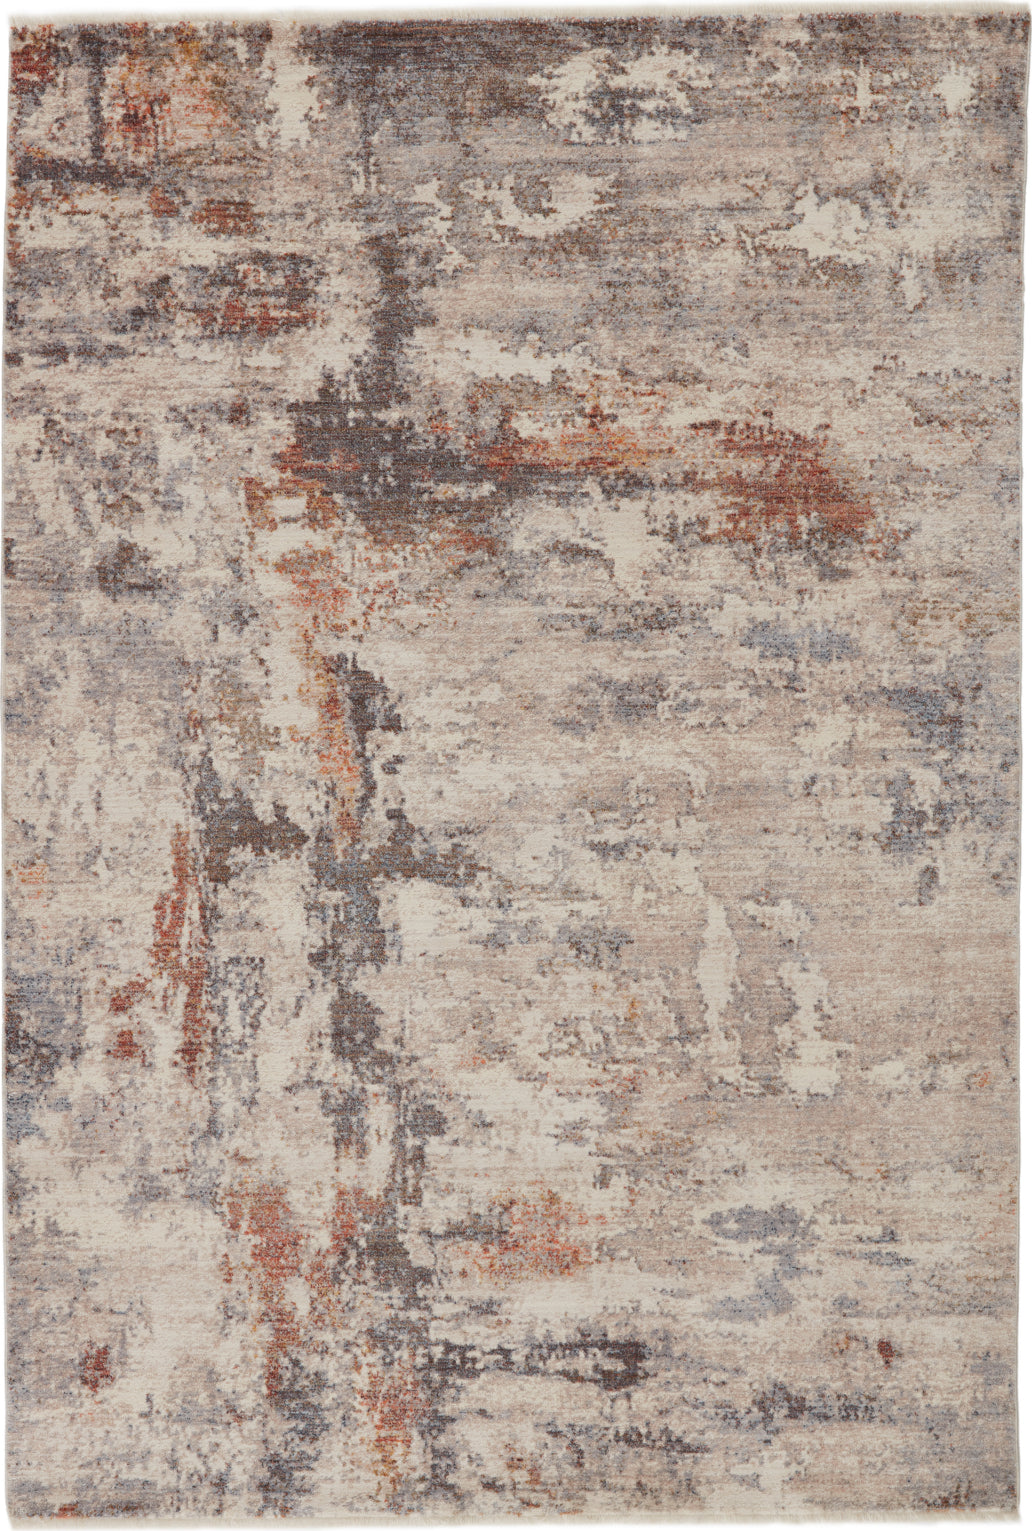 Jaipur Living Terra Heath TRR01 Gray/Red Area Rug by Vibe